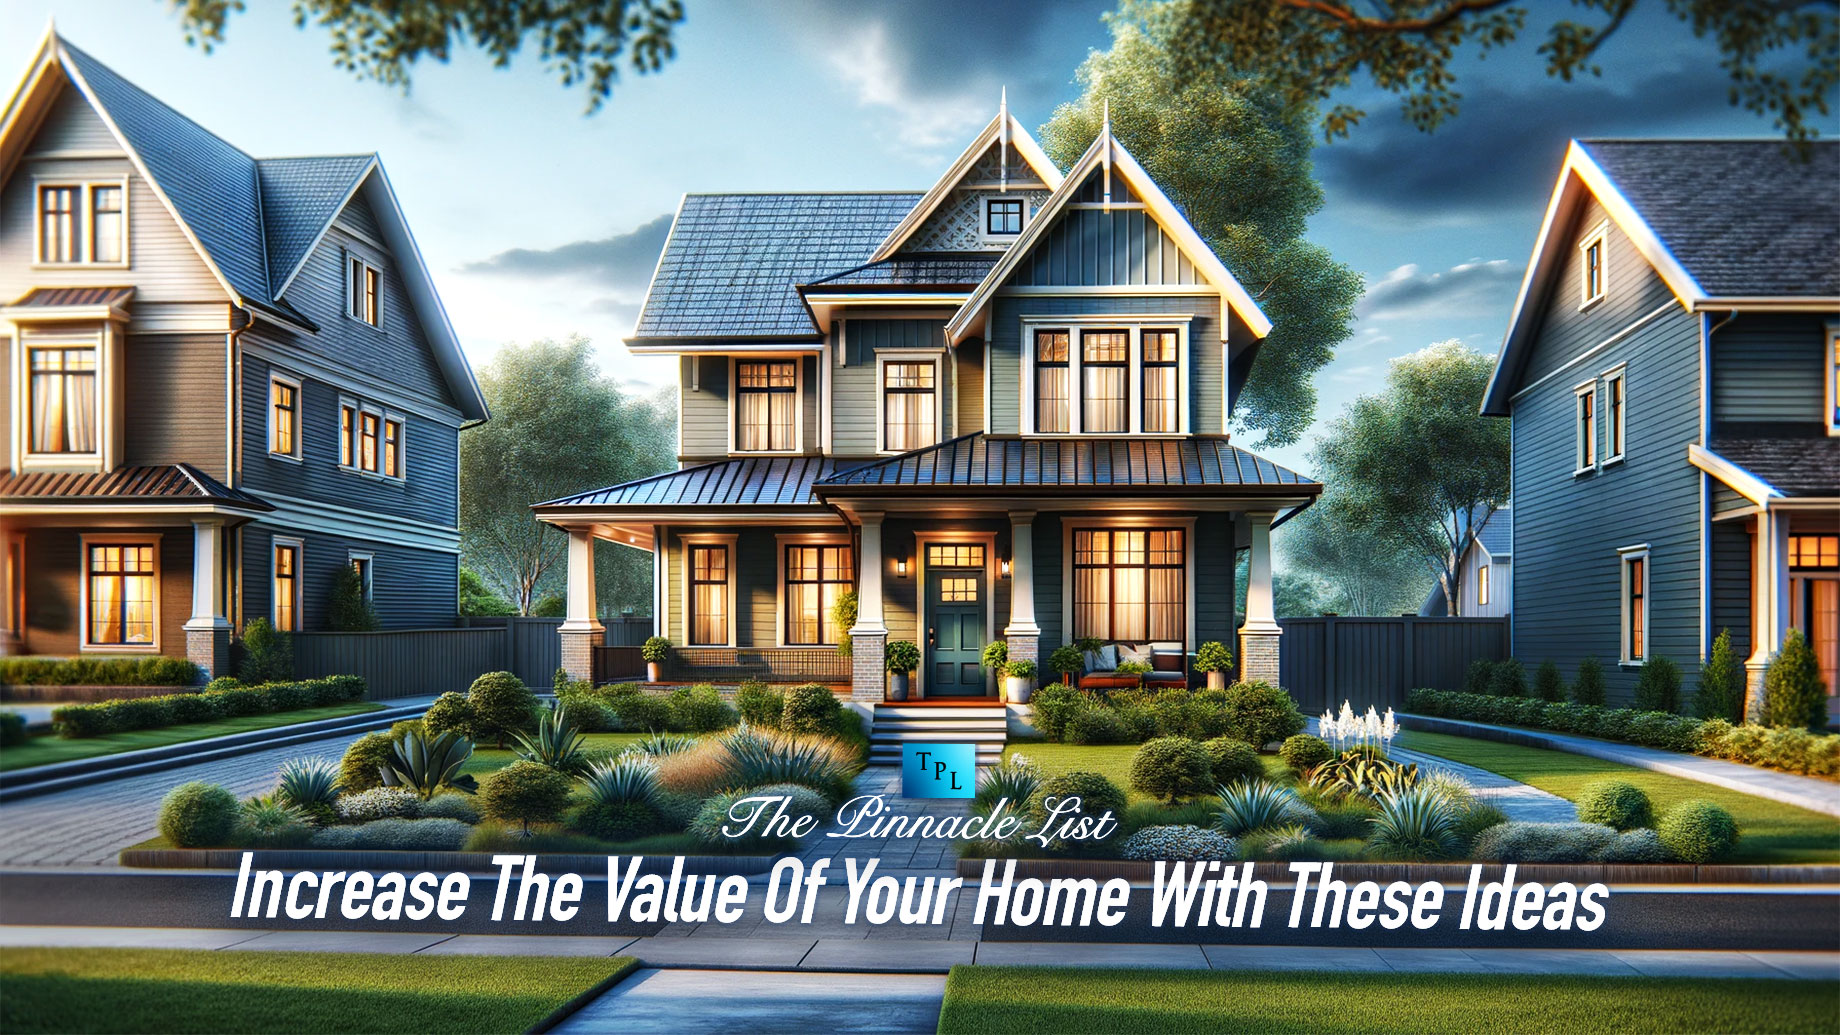 Increase The Value Of Your Home With These Ideas